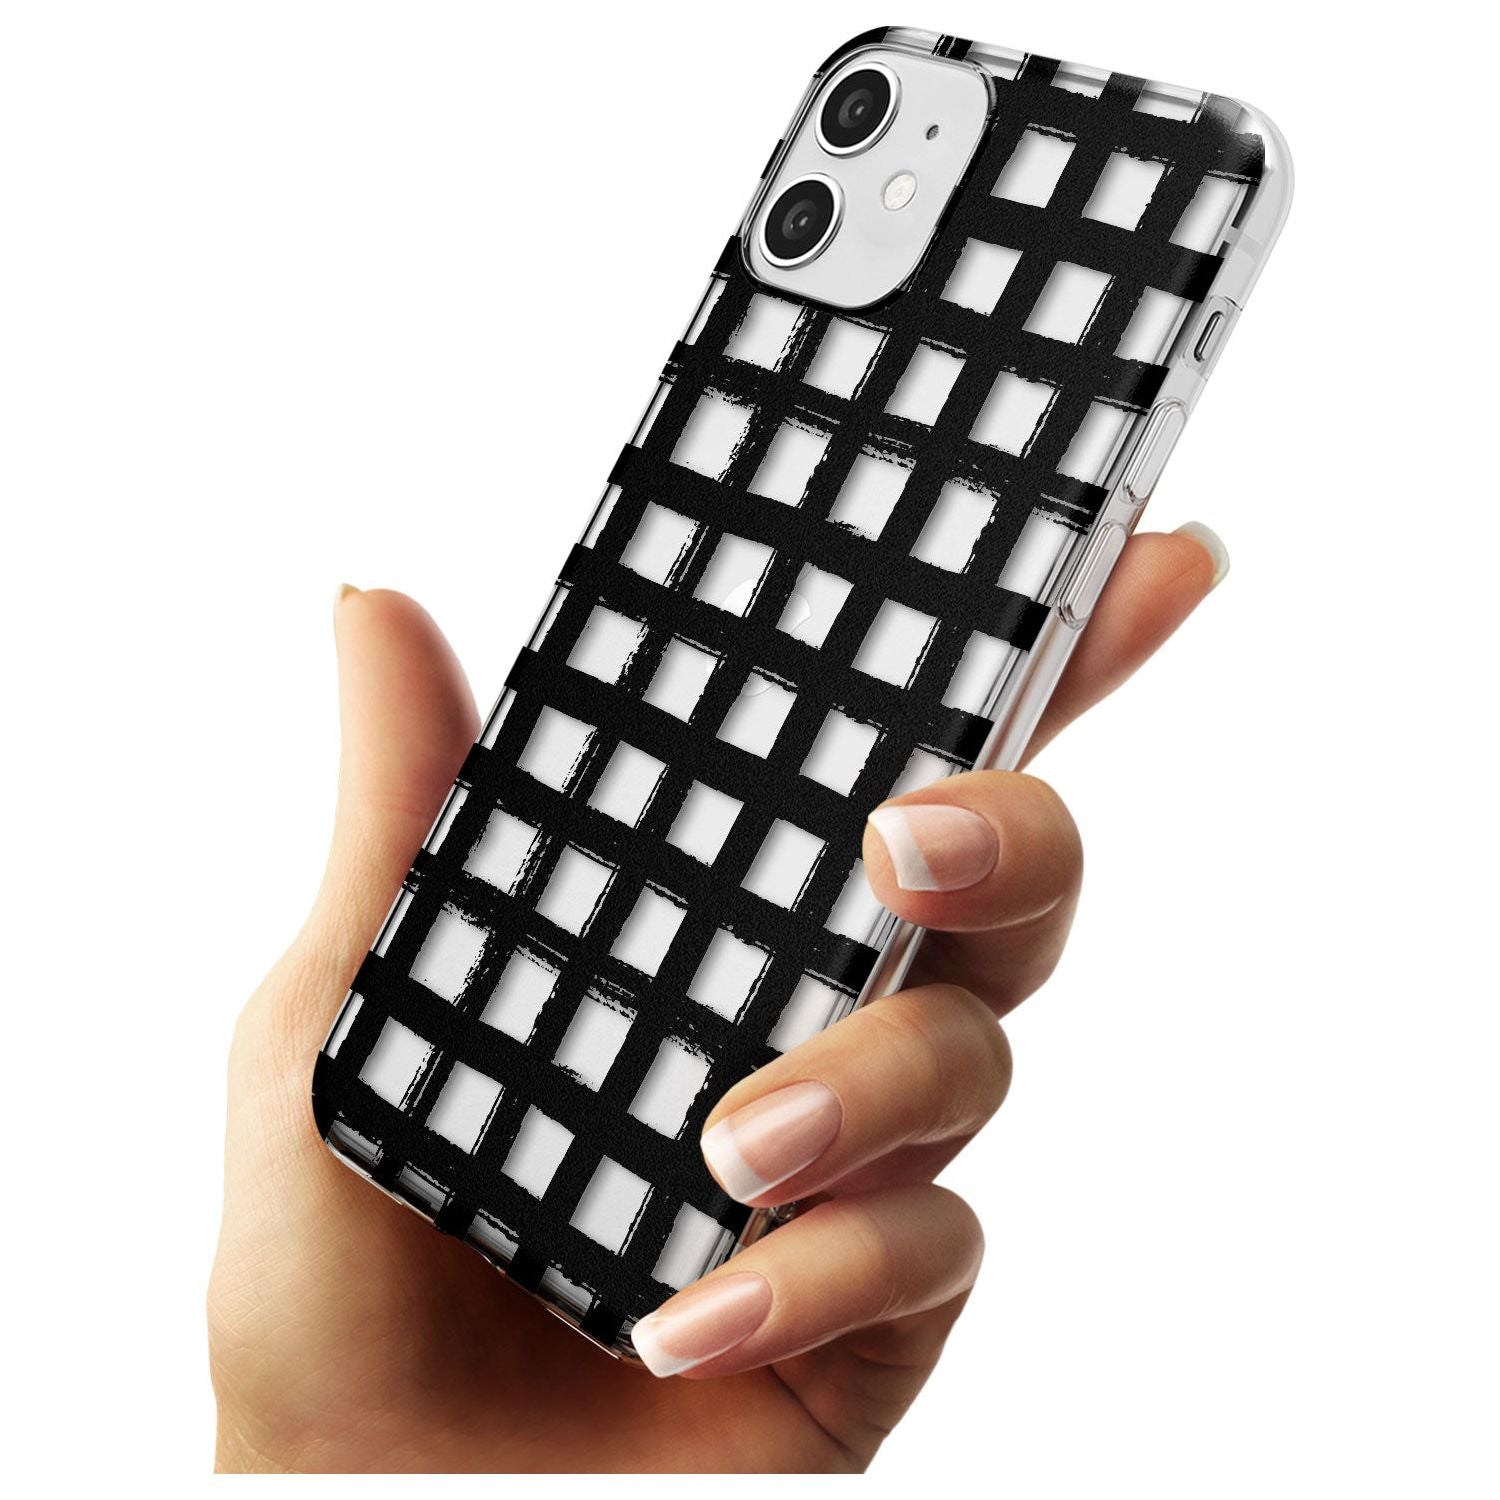 Messy Black Grid - Clear Black Impact Phone Case for iPhone 11